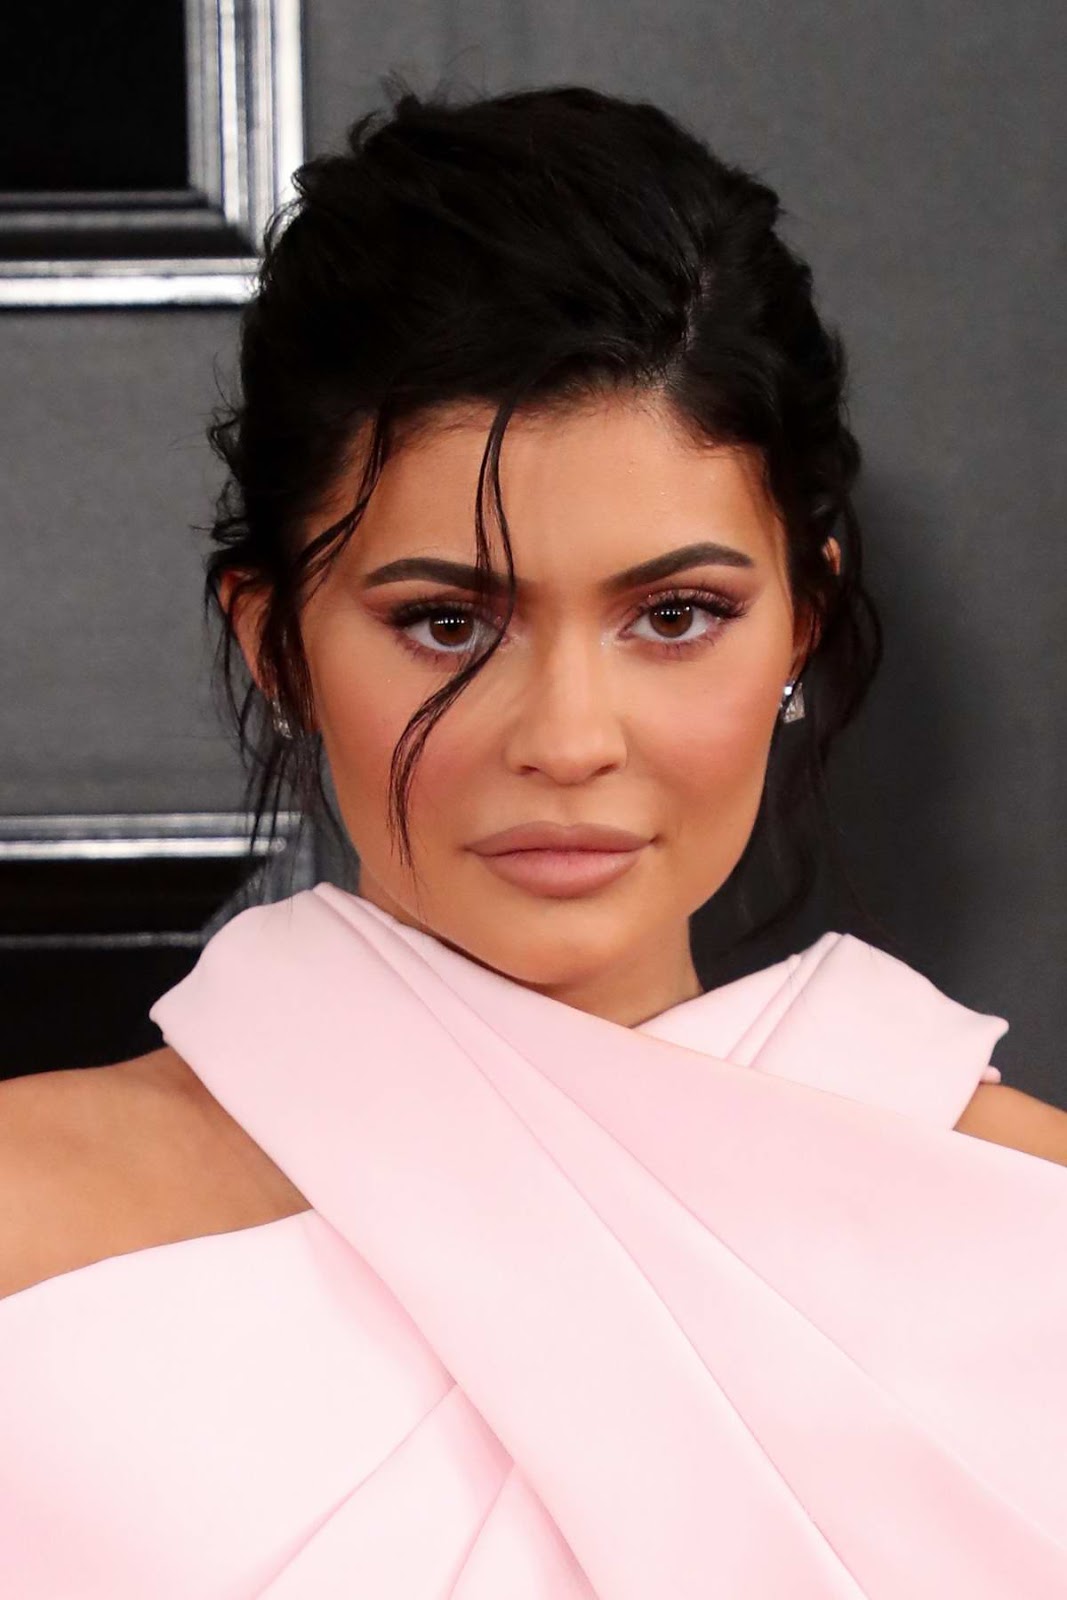 Kylie Jenner – 2019 Grammy Awards in Los Angeles – Fashion Style